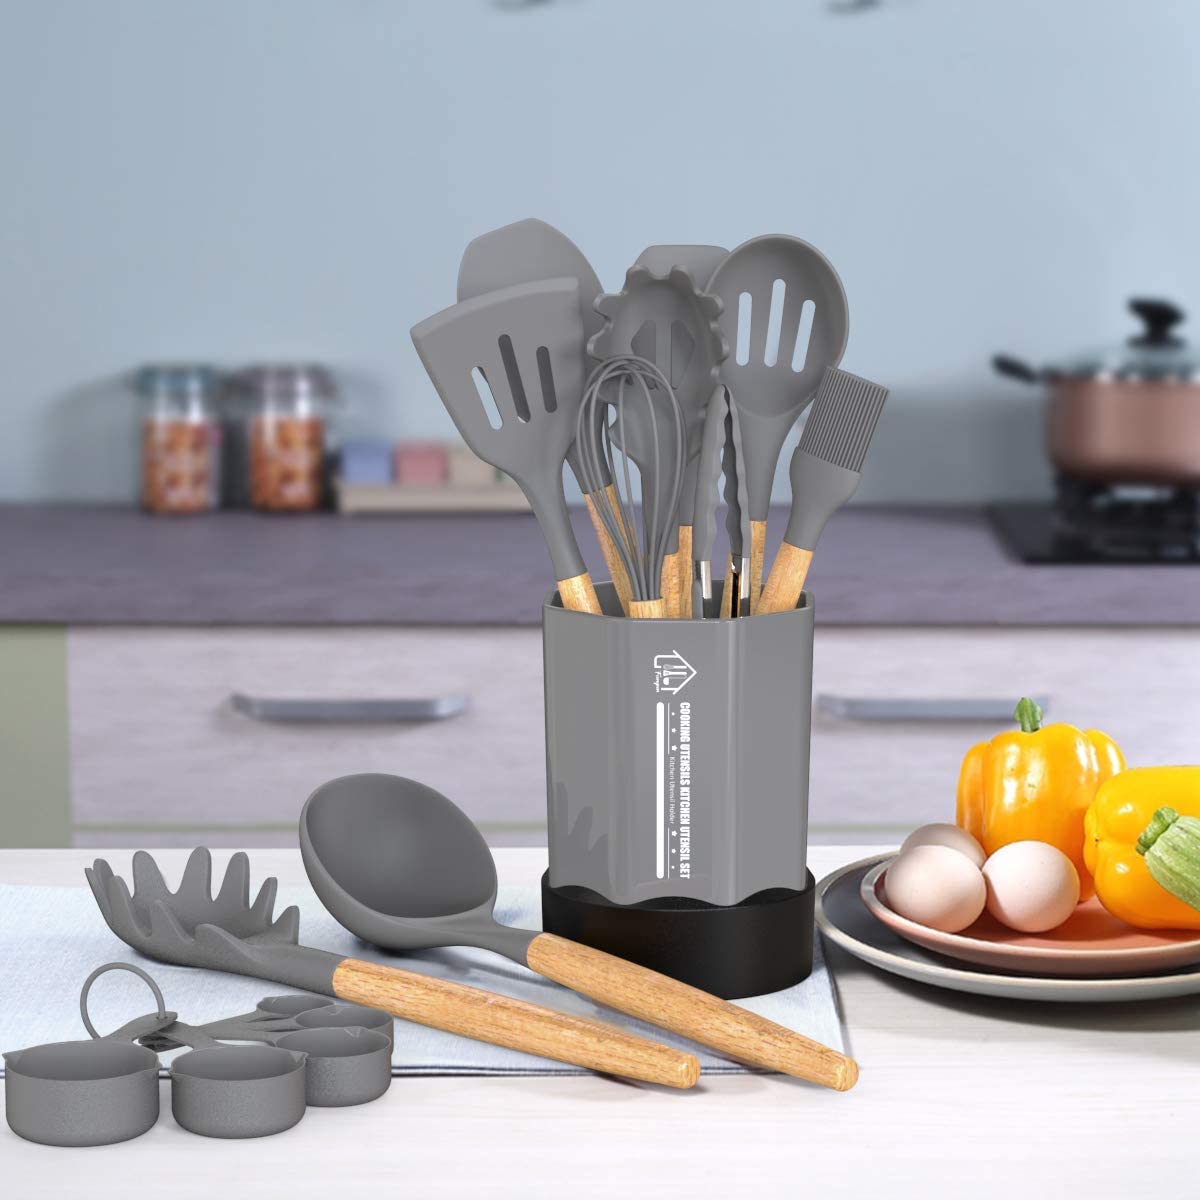 Gray Silicone Utensil Set with Wooden Handle Footek 27Pcs Kitchen Cooking Utensils Set Non-Stick Heat Resistant Kitchen Gadgets Set for Cookware